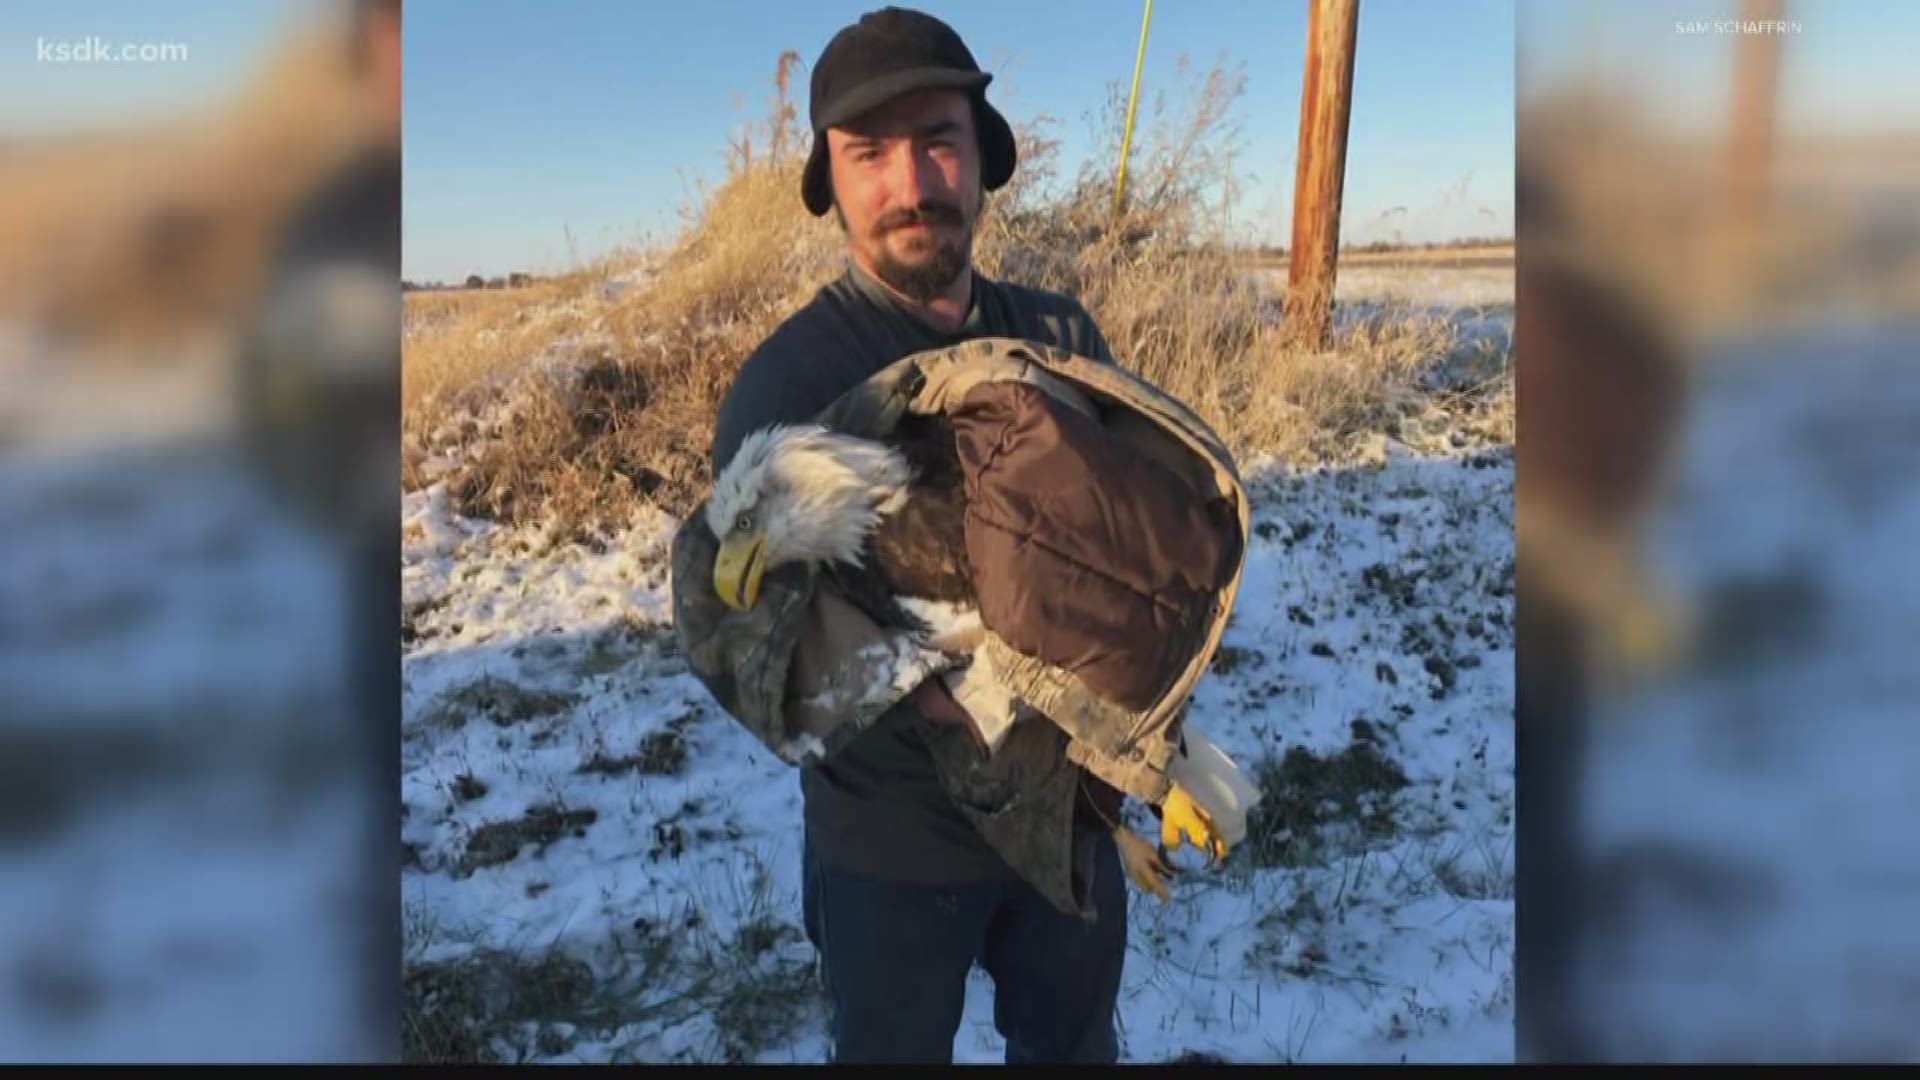 Sam Schaffrin and his friend Danny Sly were driving along snow-covered Highway F in High Hill when they spotted an injured eagle.